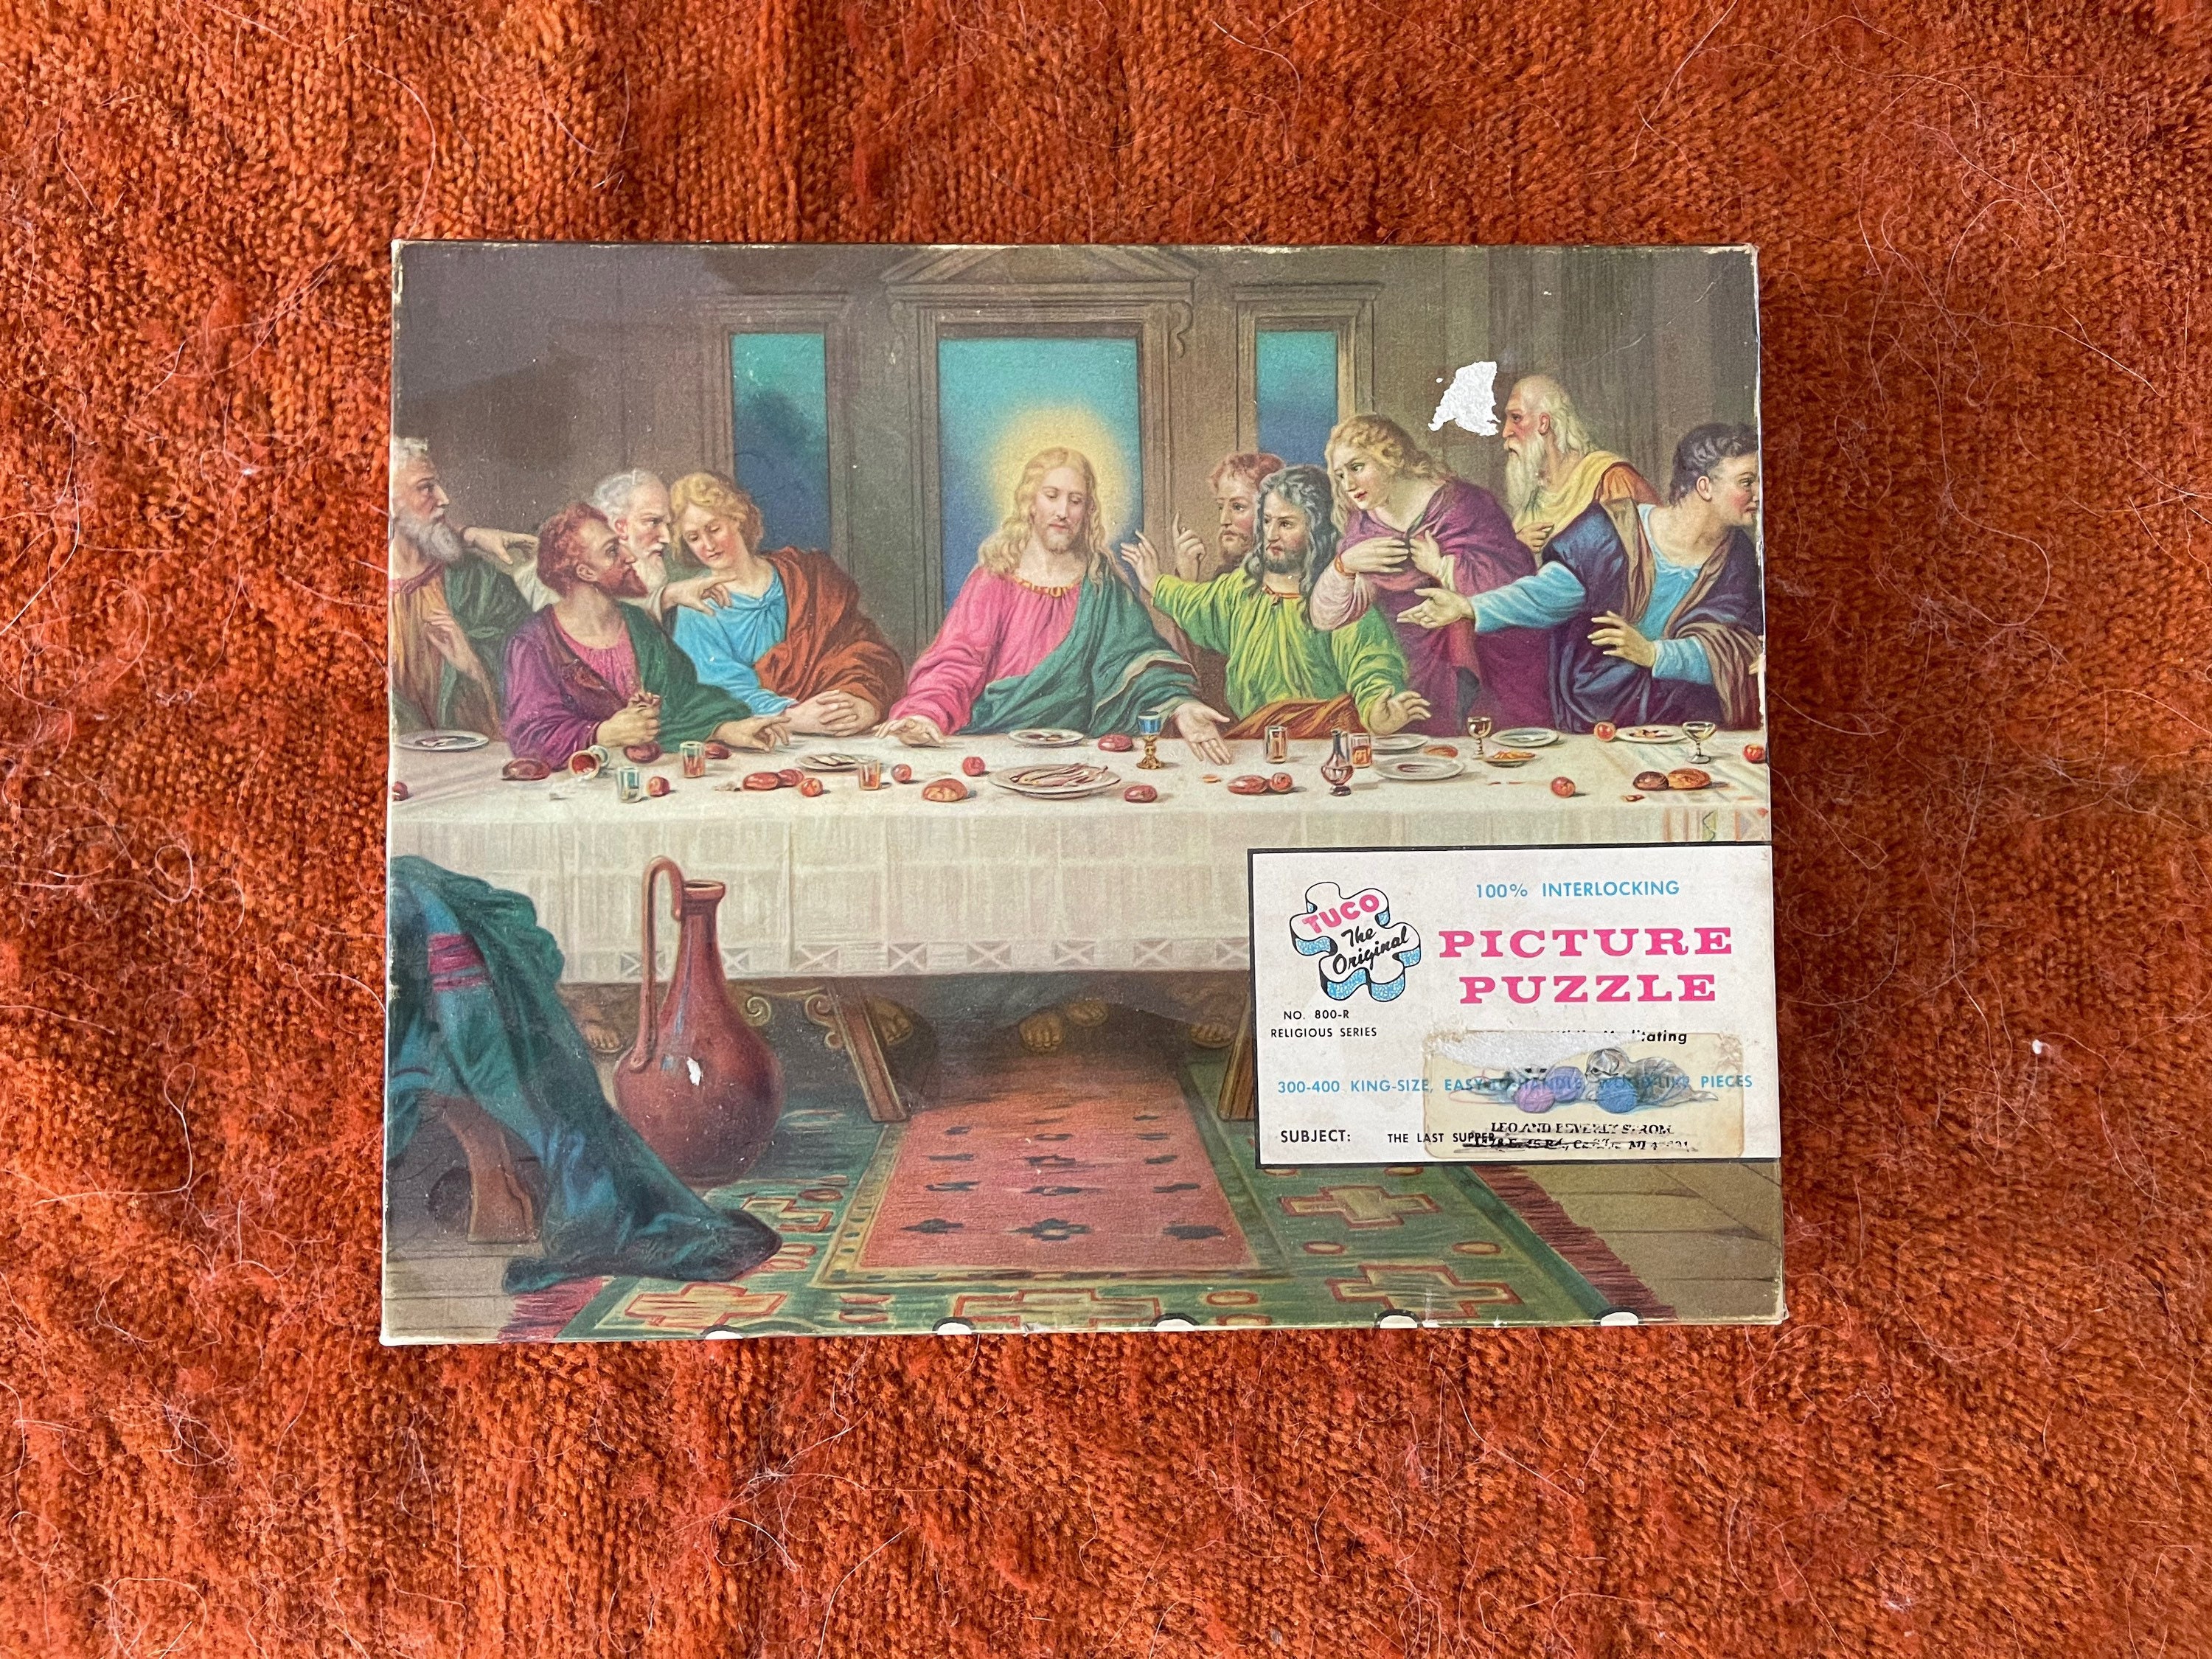 Bits and Pieces - 1000 Piece Jigsaw Puzzle for Adults 20 x 27 - The Last Supper Jigsaw Puzzle by Ruane Manning - Jesus East